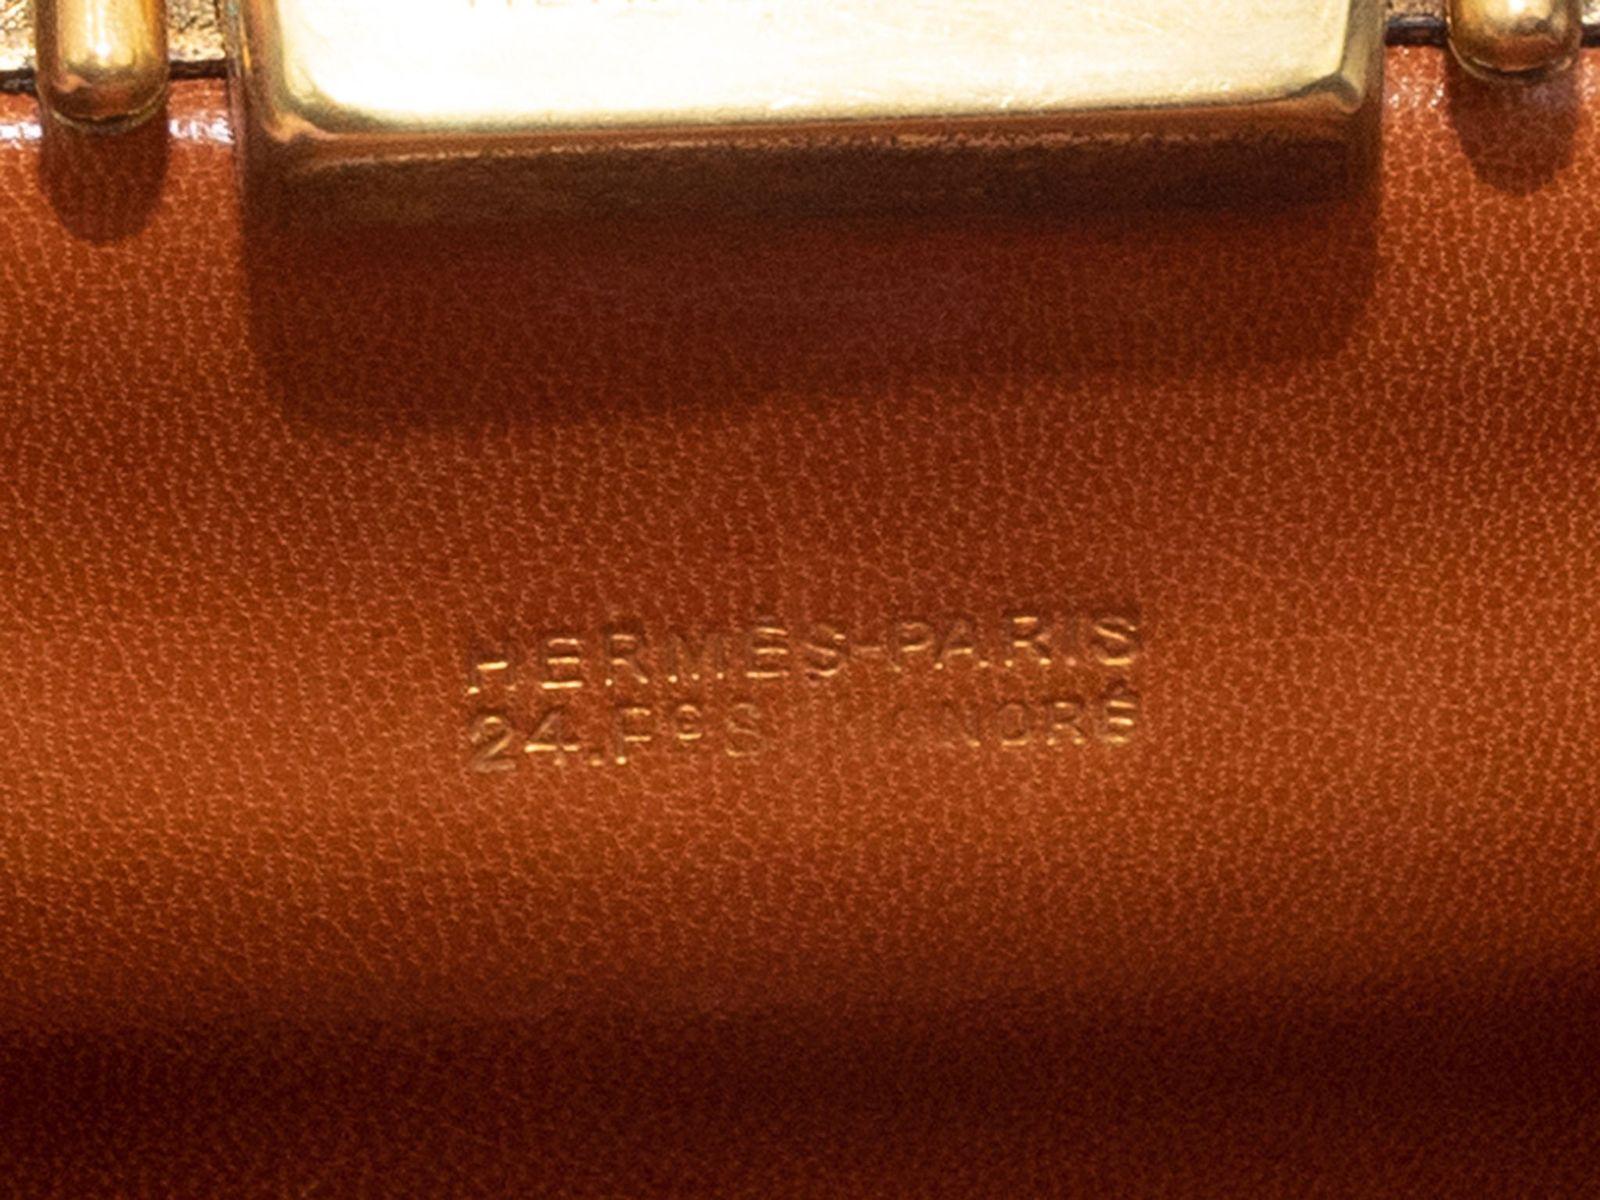 Product Details: Vintage Tan Hermes Rare Sac Malette Bag. The Sac Malette features a leather body, gold-tone hardware, single rolled top handle, and front push-lock closure. 11